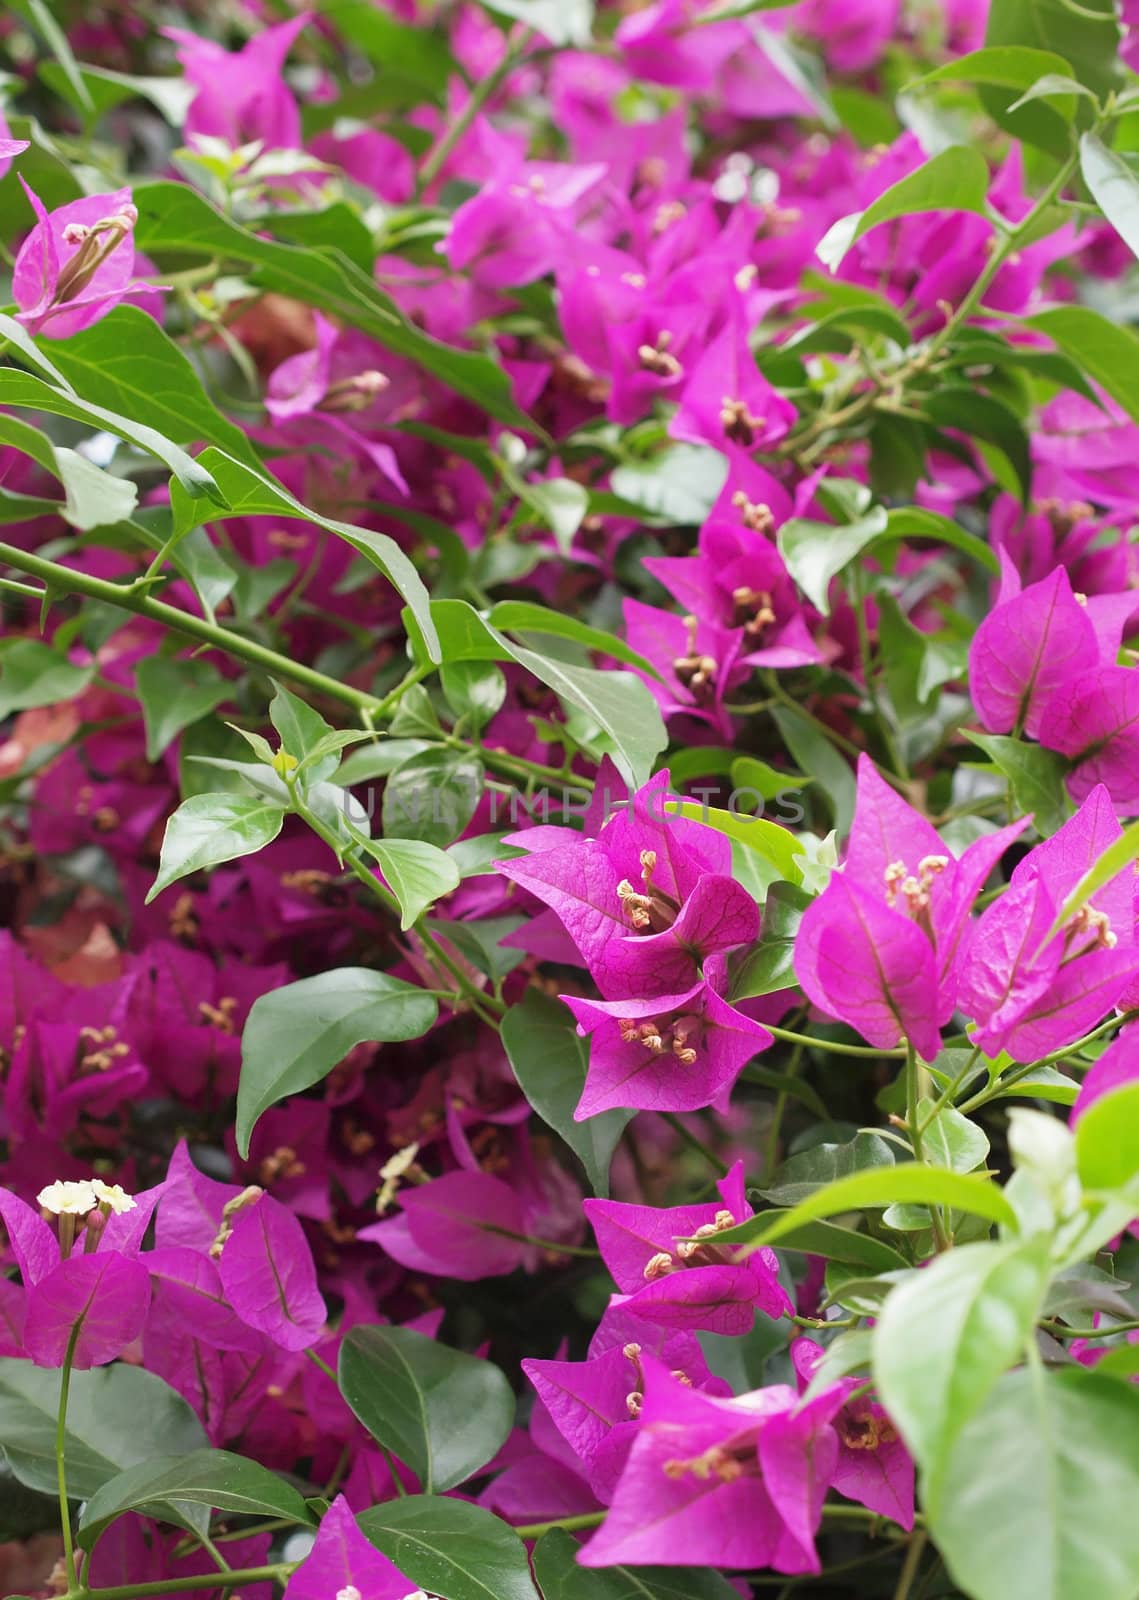 bougainvillea flowers by Ric510